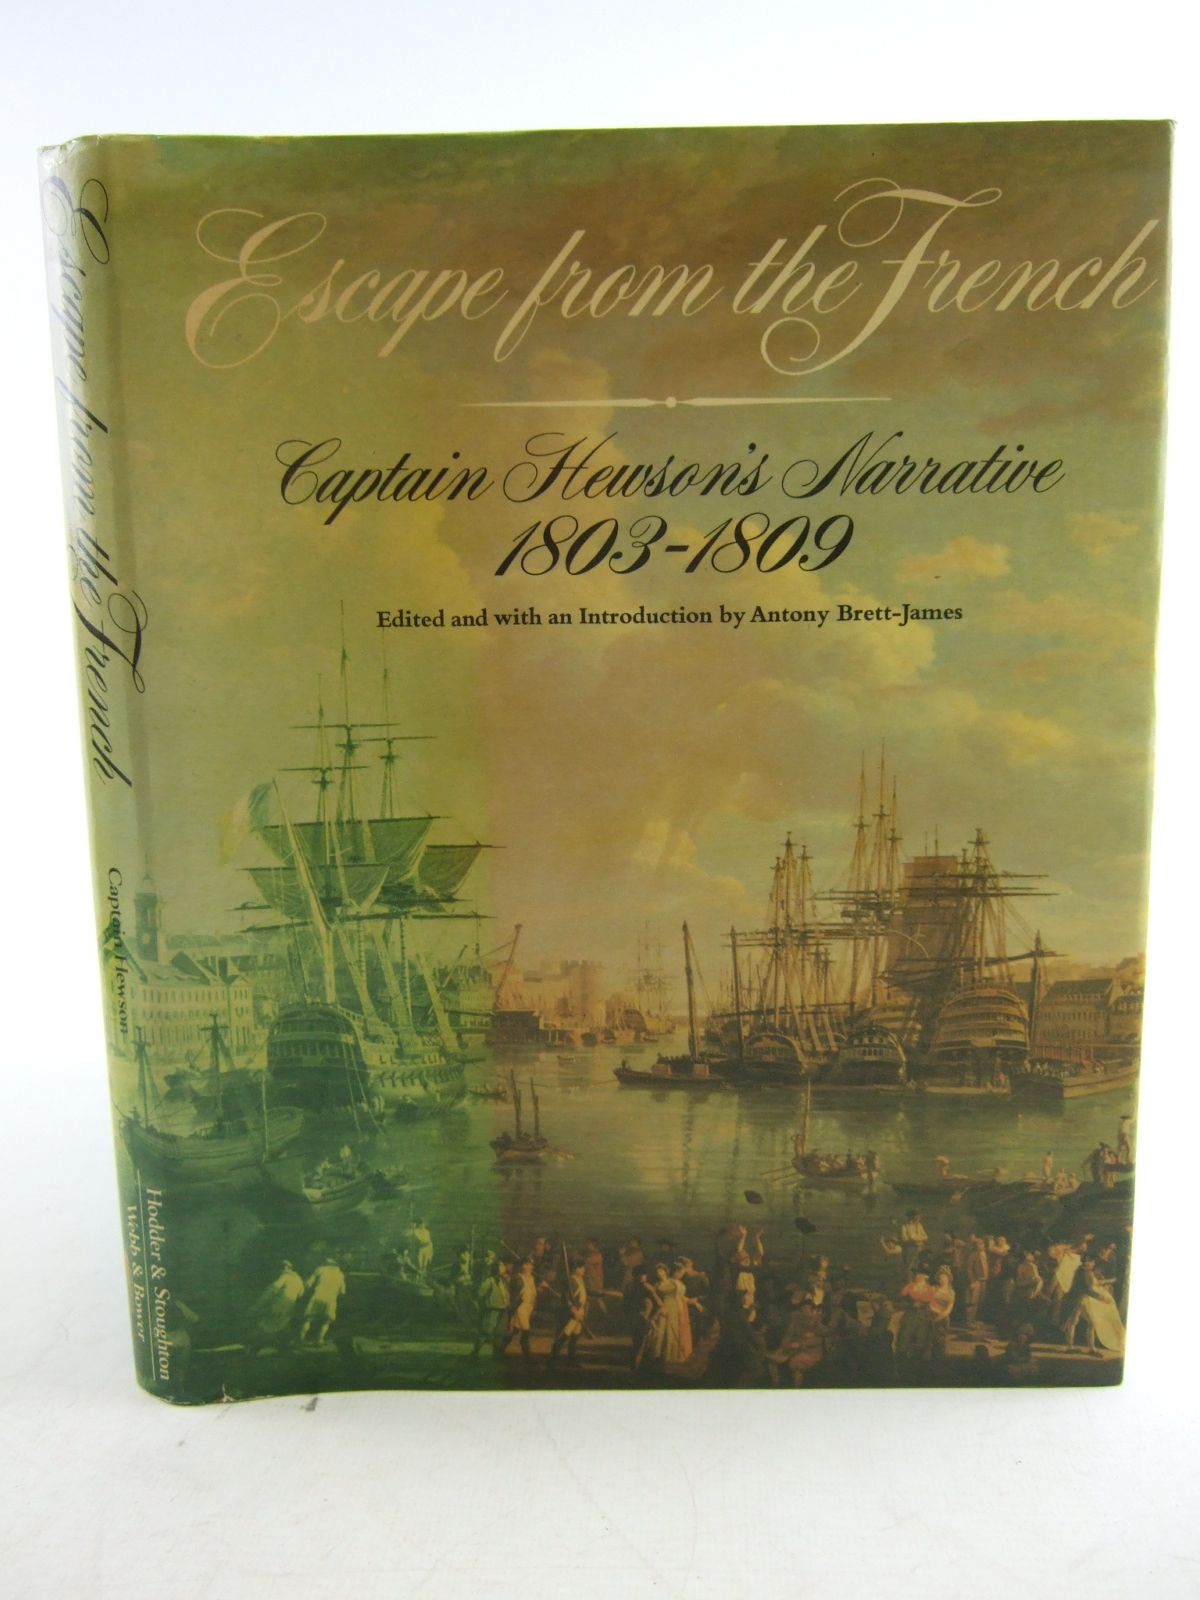 Photo of ESCAPE FROM THE FRENCH CAPTAIN HEWSON'S NARRATIVE (1803-1809) written by Hewson, Maurice Brett-James, Antony published by Hodder &amp; Stoughton (STOCK CODE: 1806968)  for sale by Stella & Rose's Books